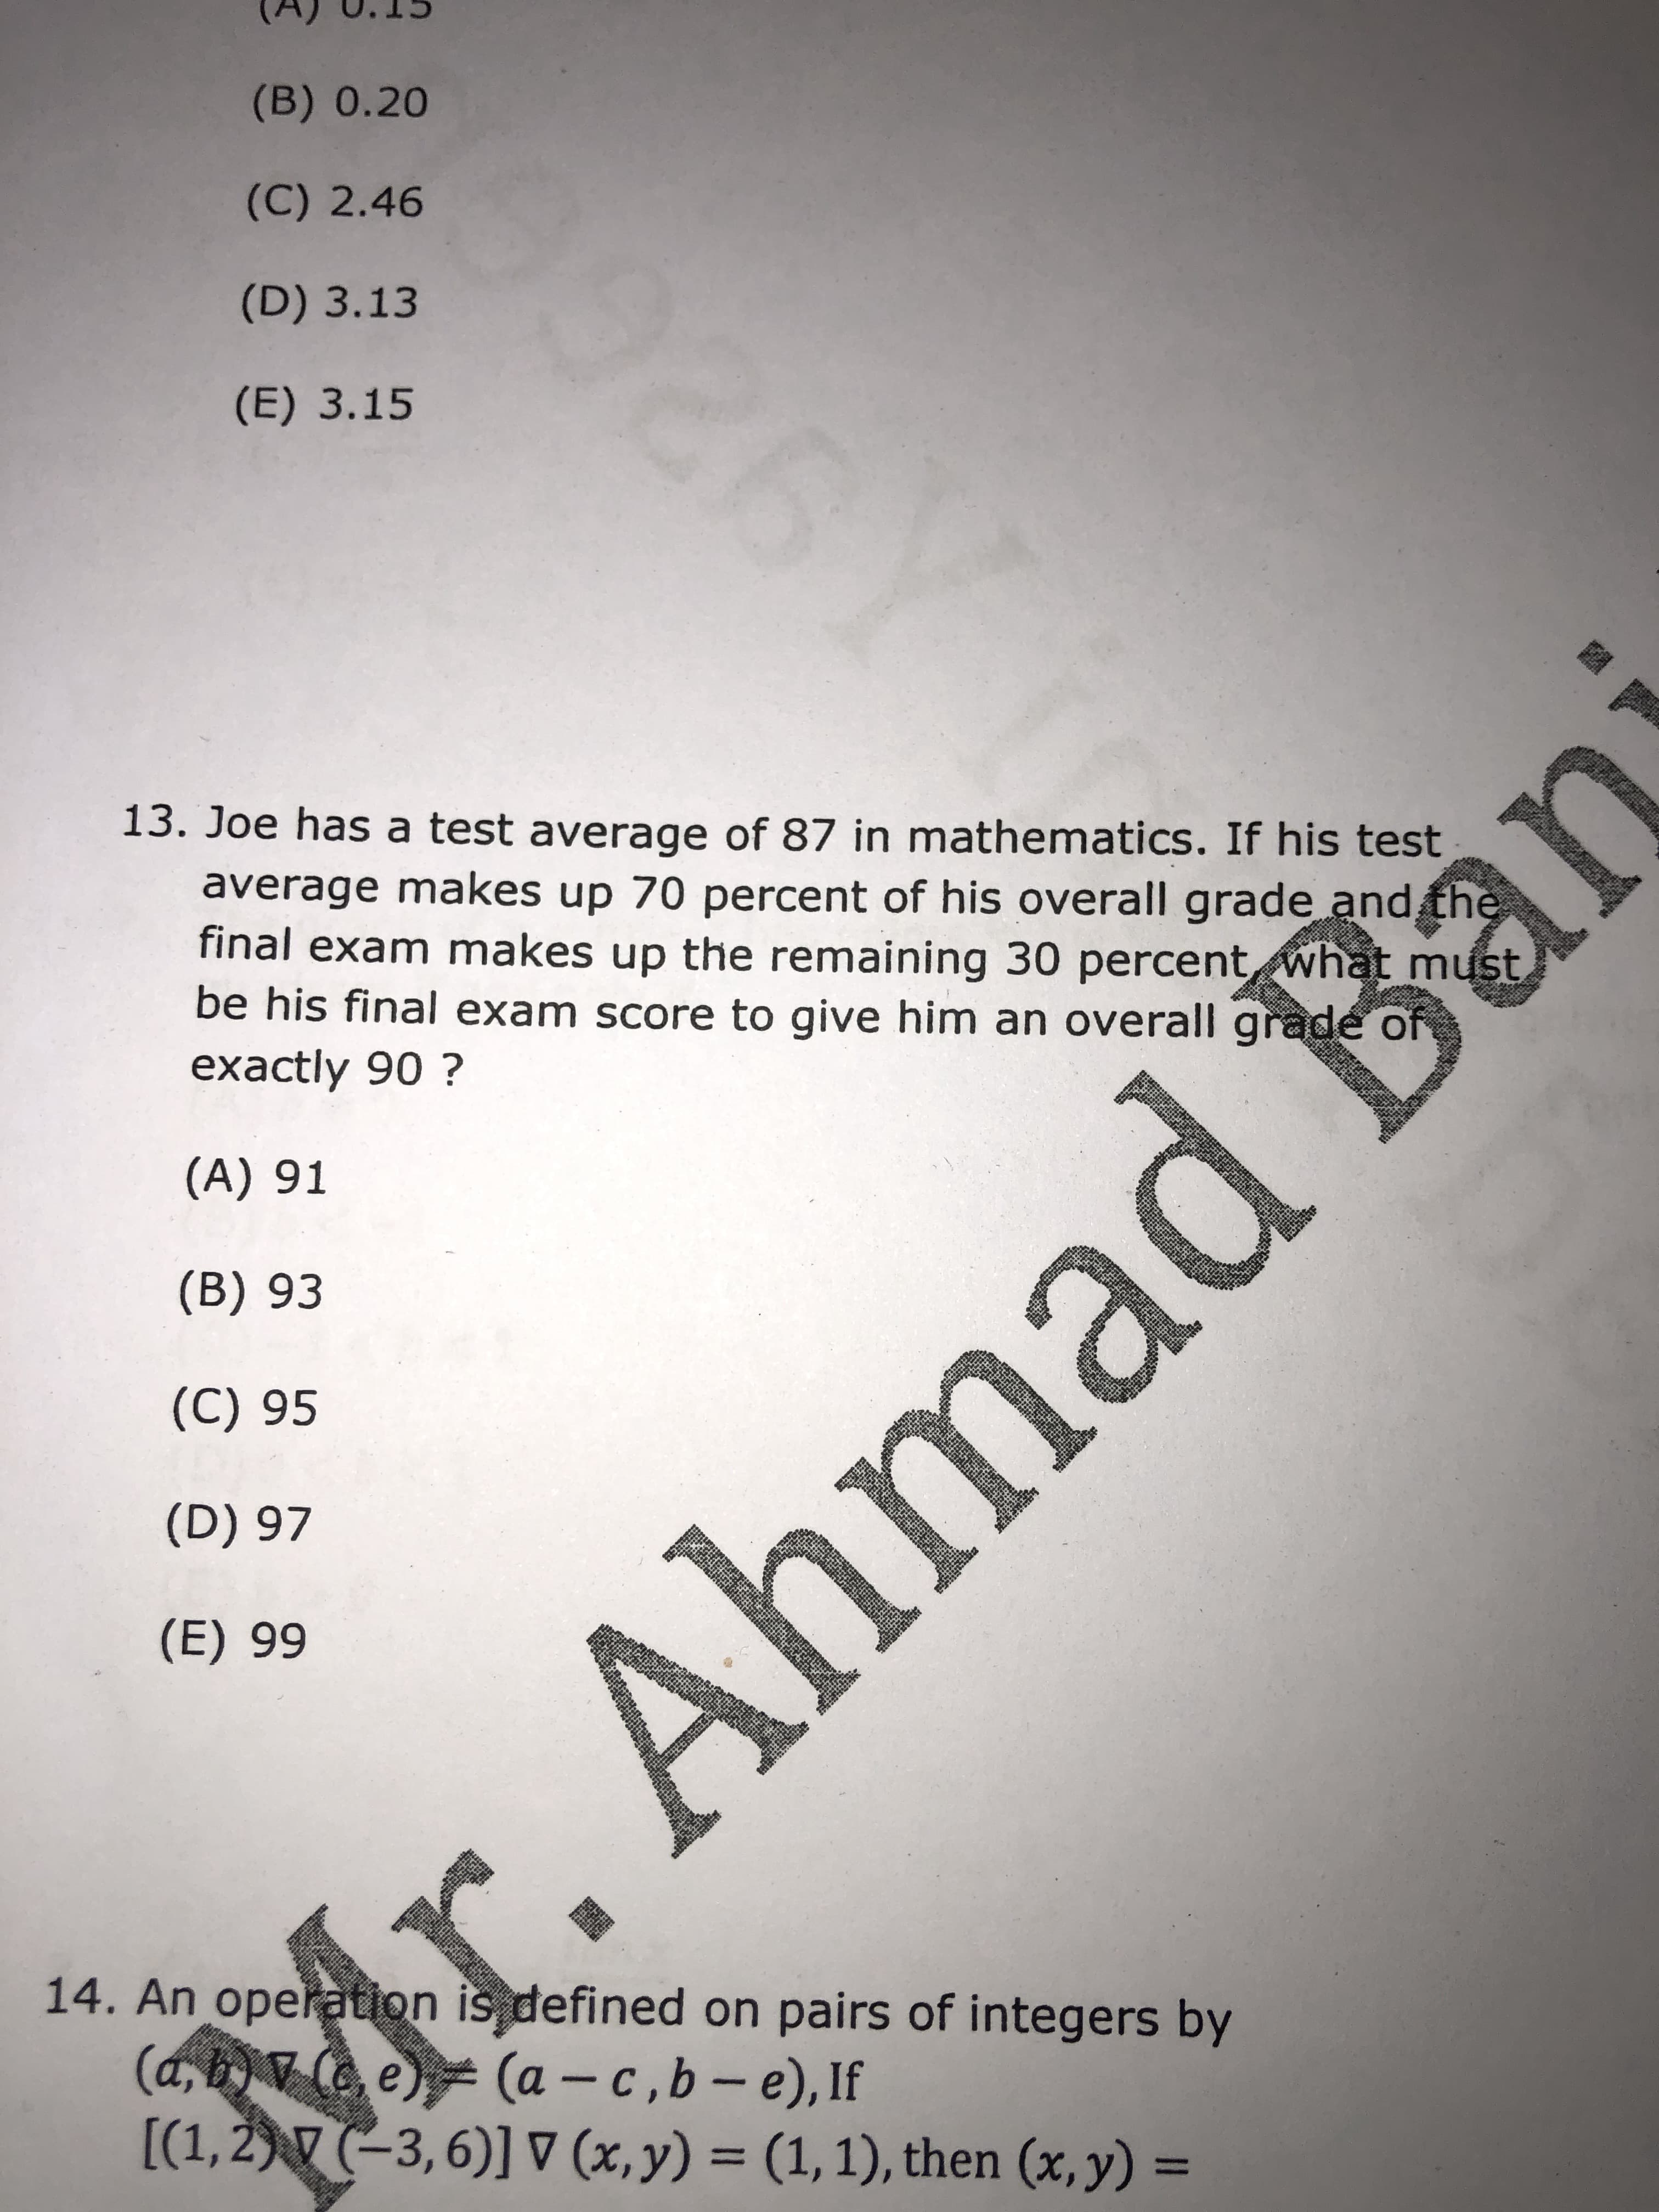 13. Joe has a test average of 87 in mathematics. If his test
average makes up 70 percent of his overall grade and the
final exam makes up the remaining 30 percent what must
be his final exam score to give him an overall grade of
exactly 90 ?
